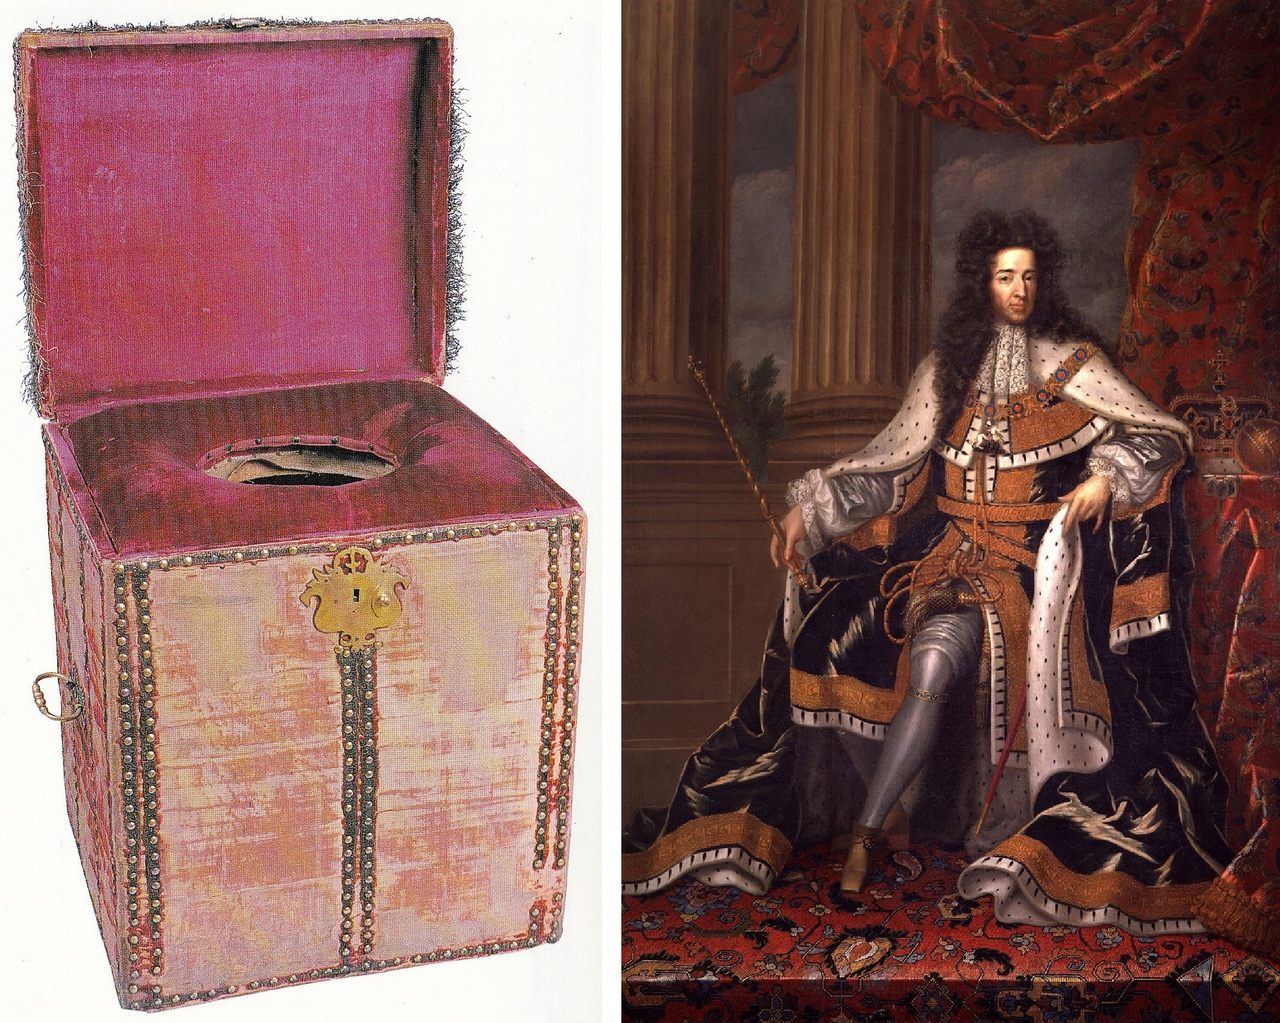 King William III and his mid-17th century "close stool," which is on display at Hampton Court.